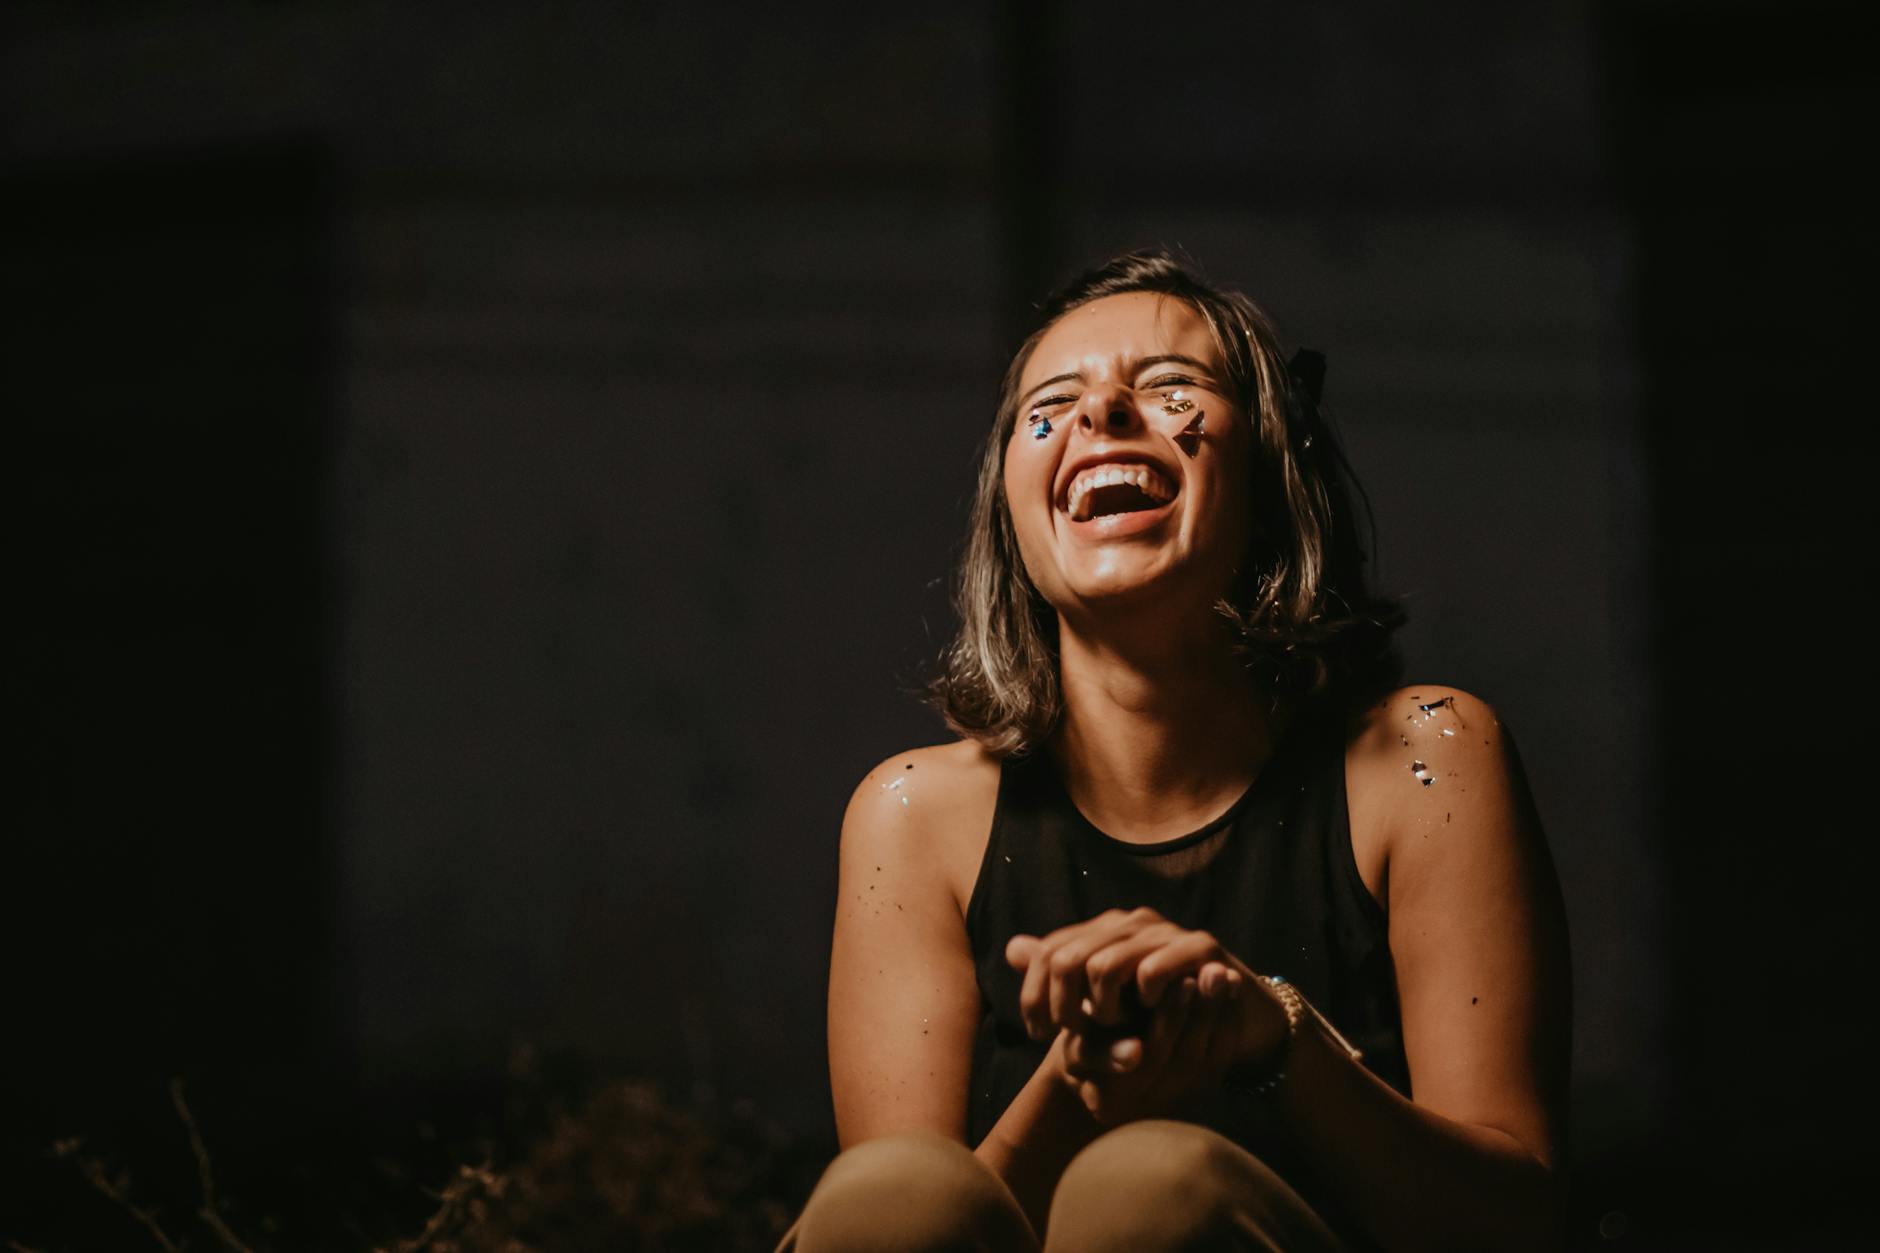 photo of a woman laughing wearing black top